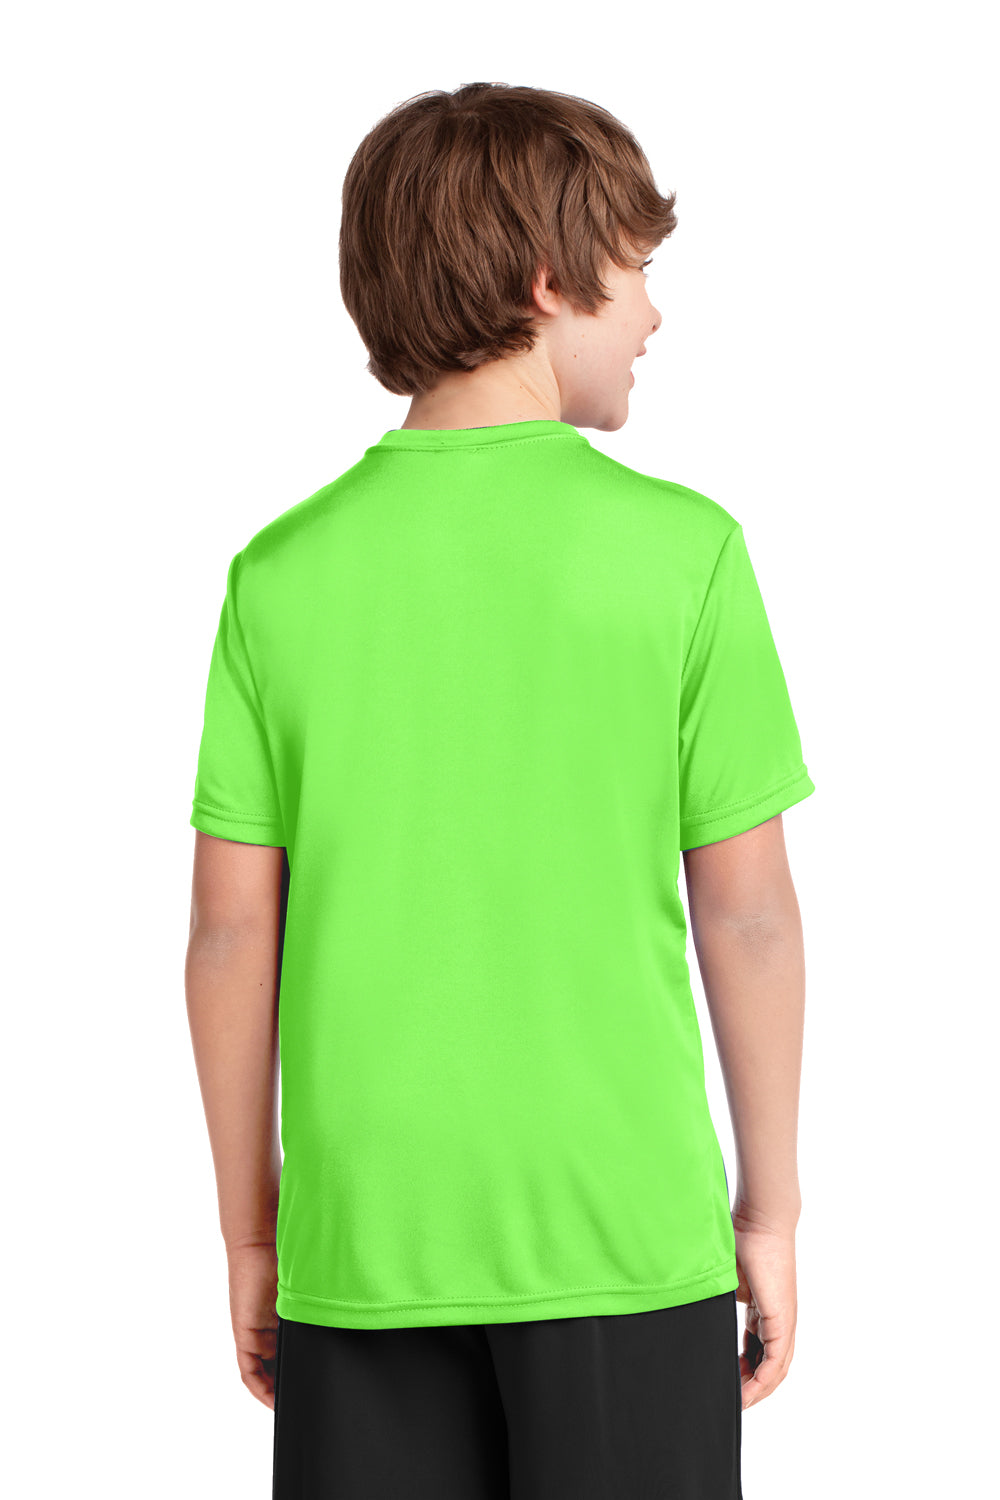 Port & Company PC380Y Youth Dry Zone Performance Moisture Wicking Short Sleeve Crewneck T-Shirt Neon Green Back